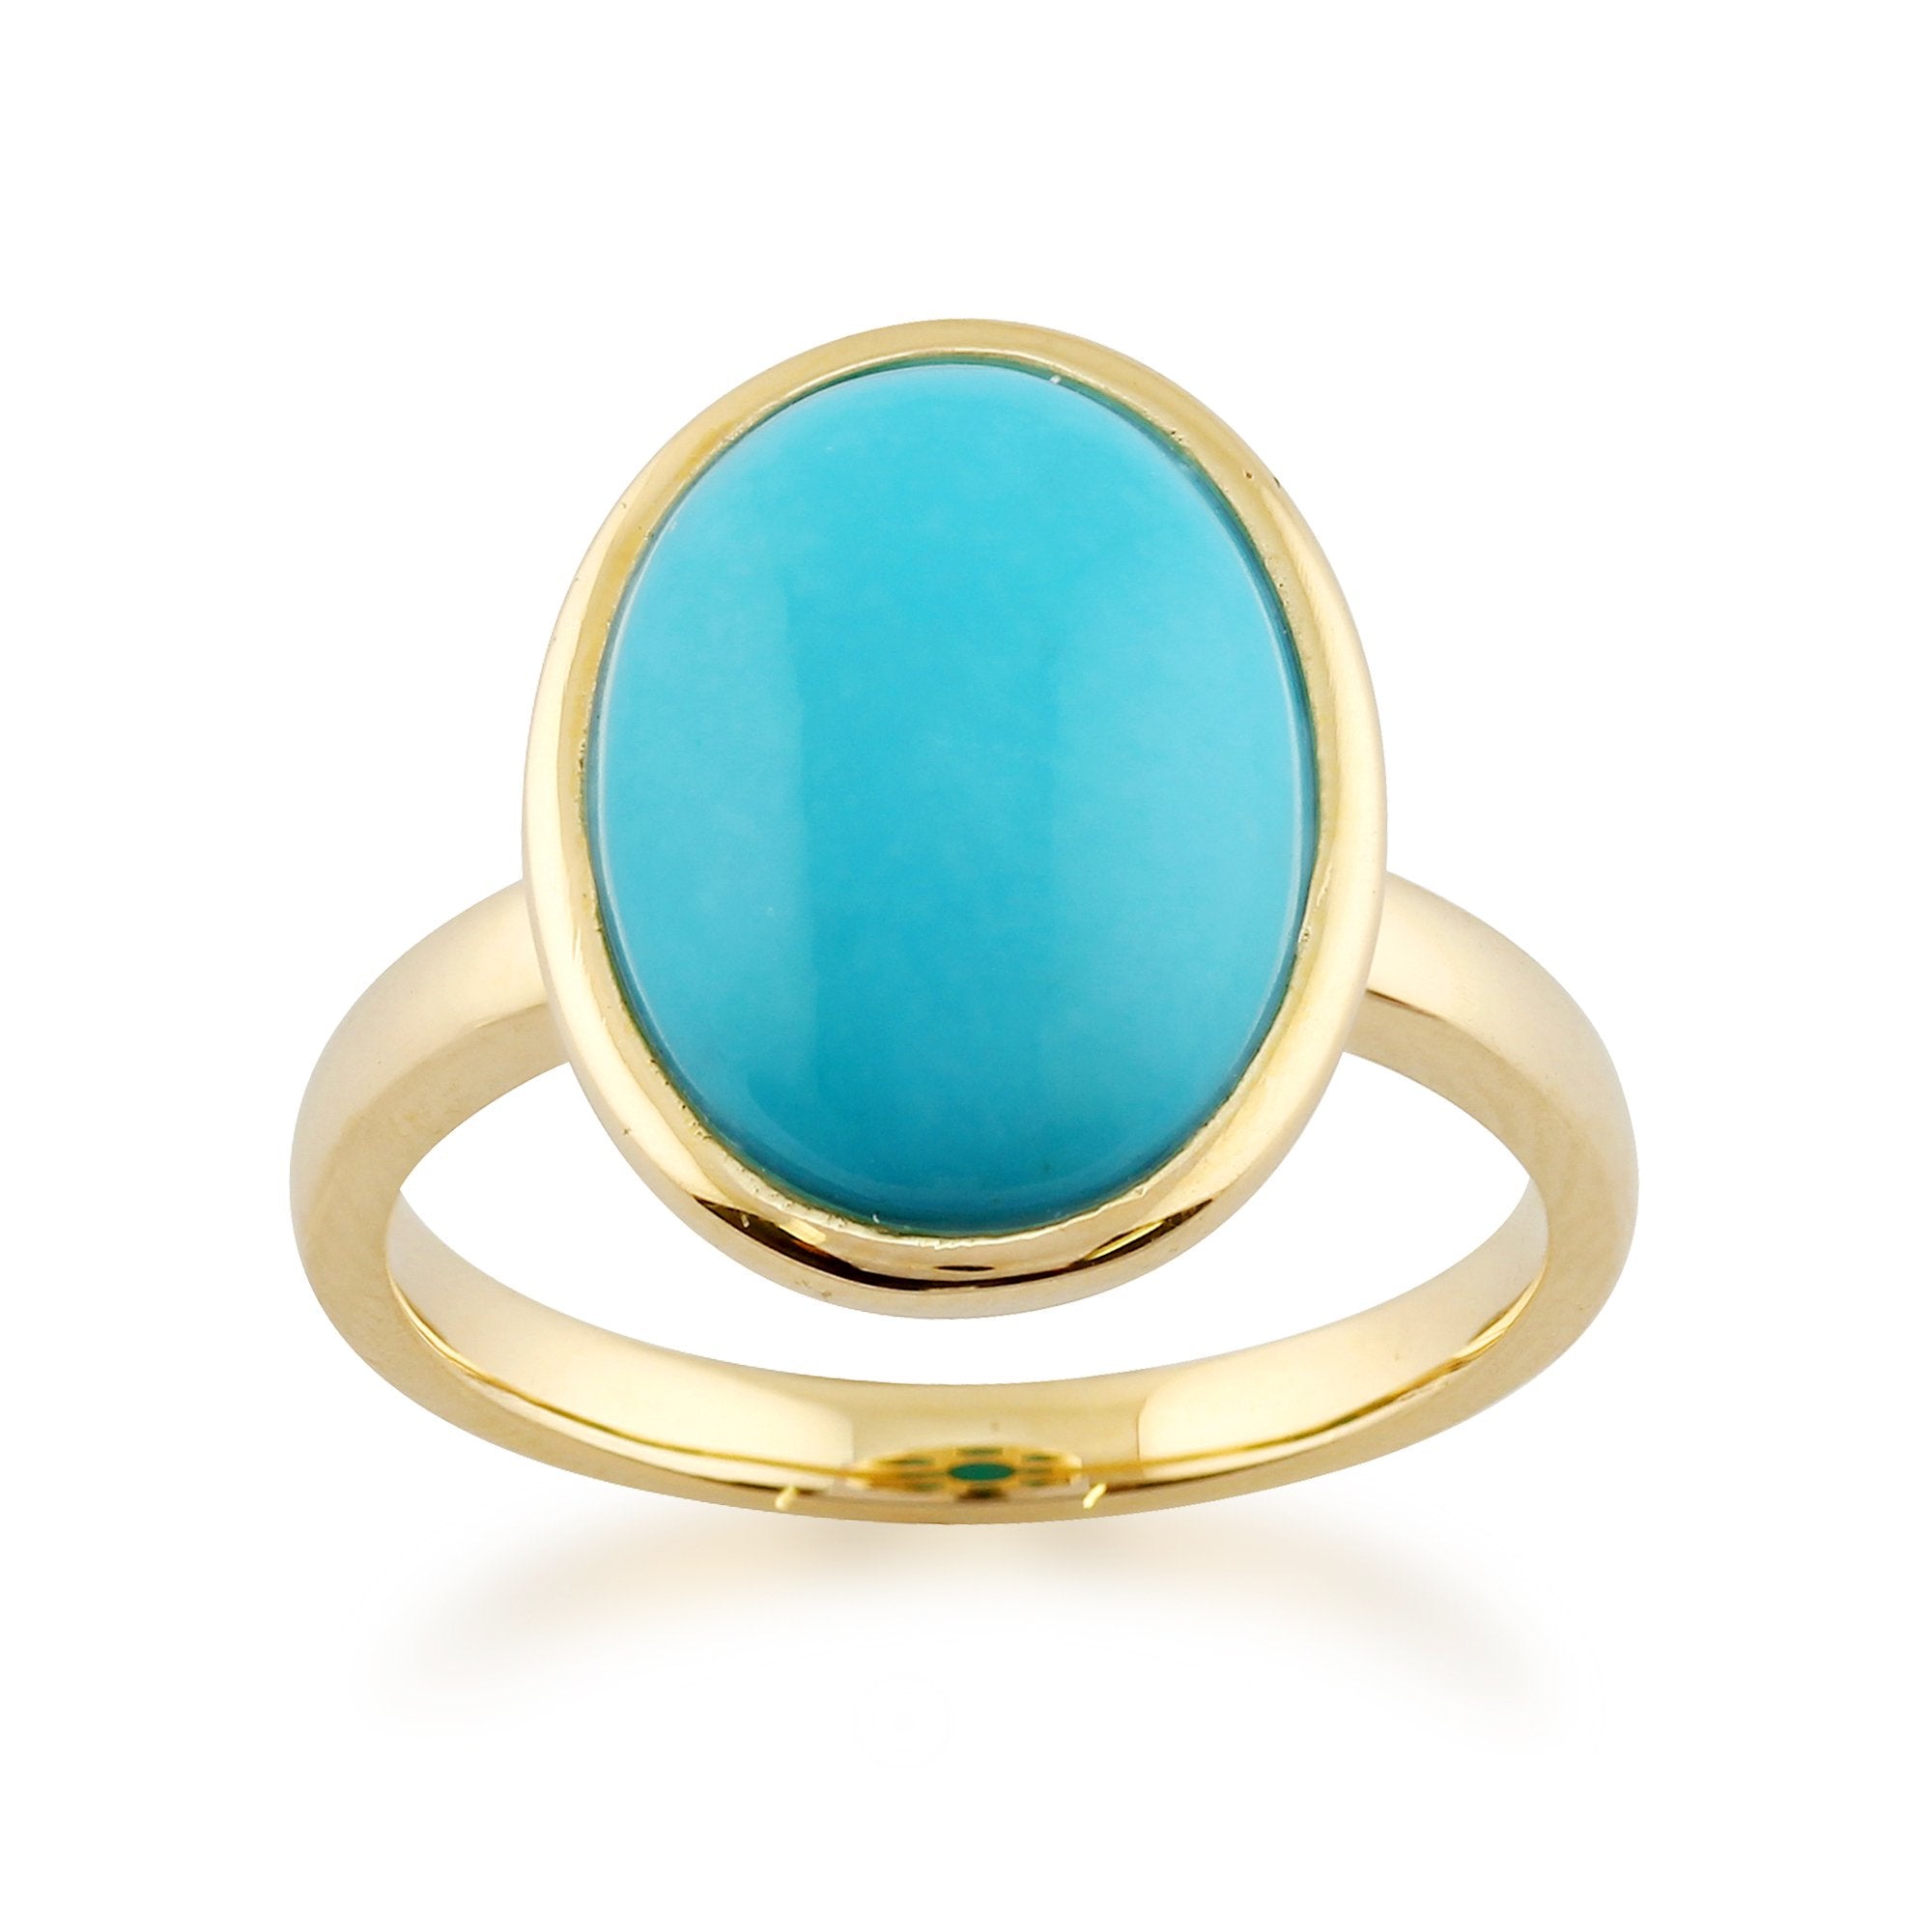 Statement Oval Turquoise Ring in 9ct Yellow Gold